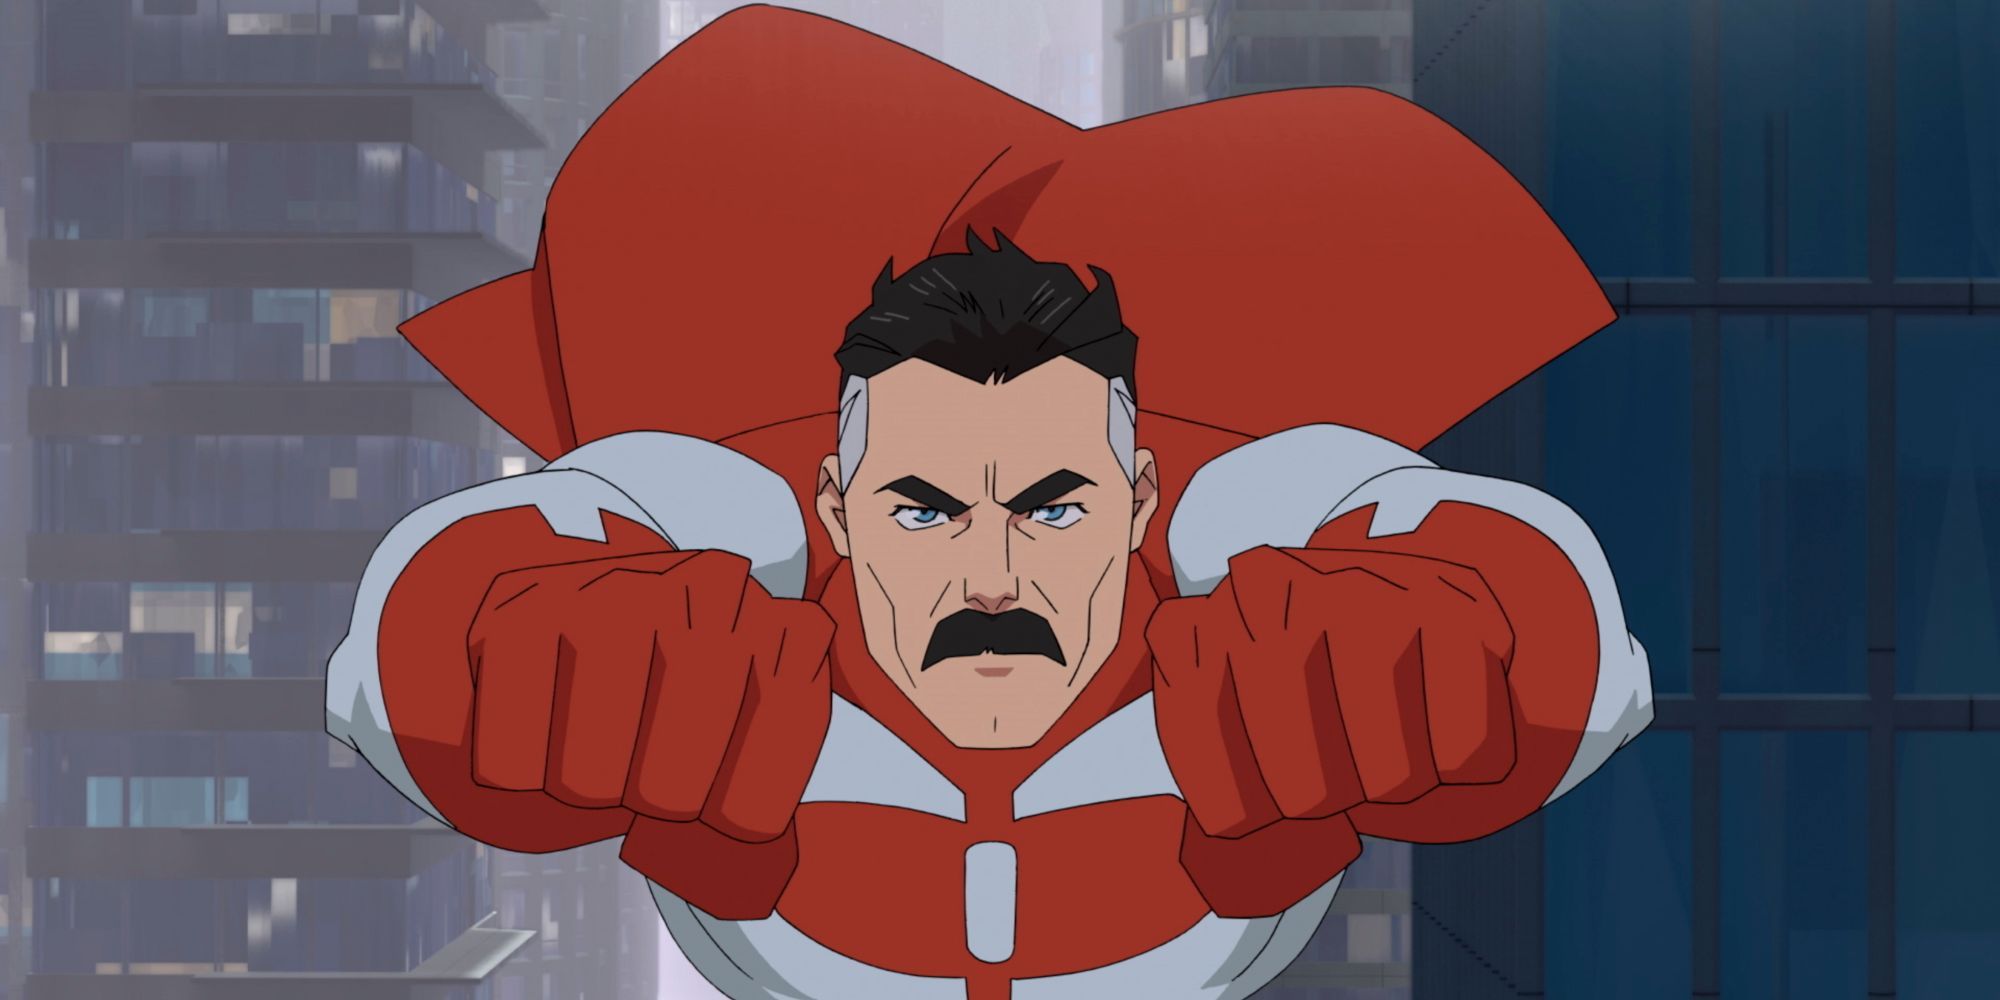 Omni-Man flying in scene from Invincible animated series.